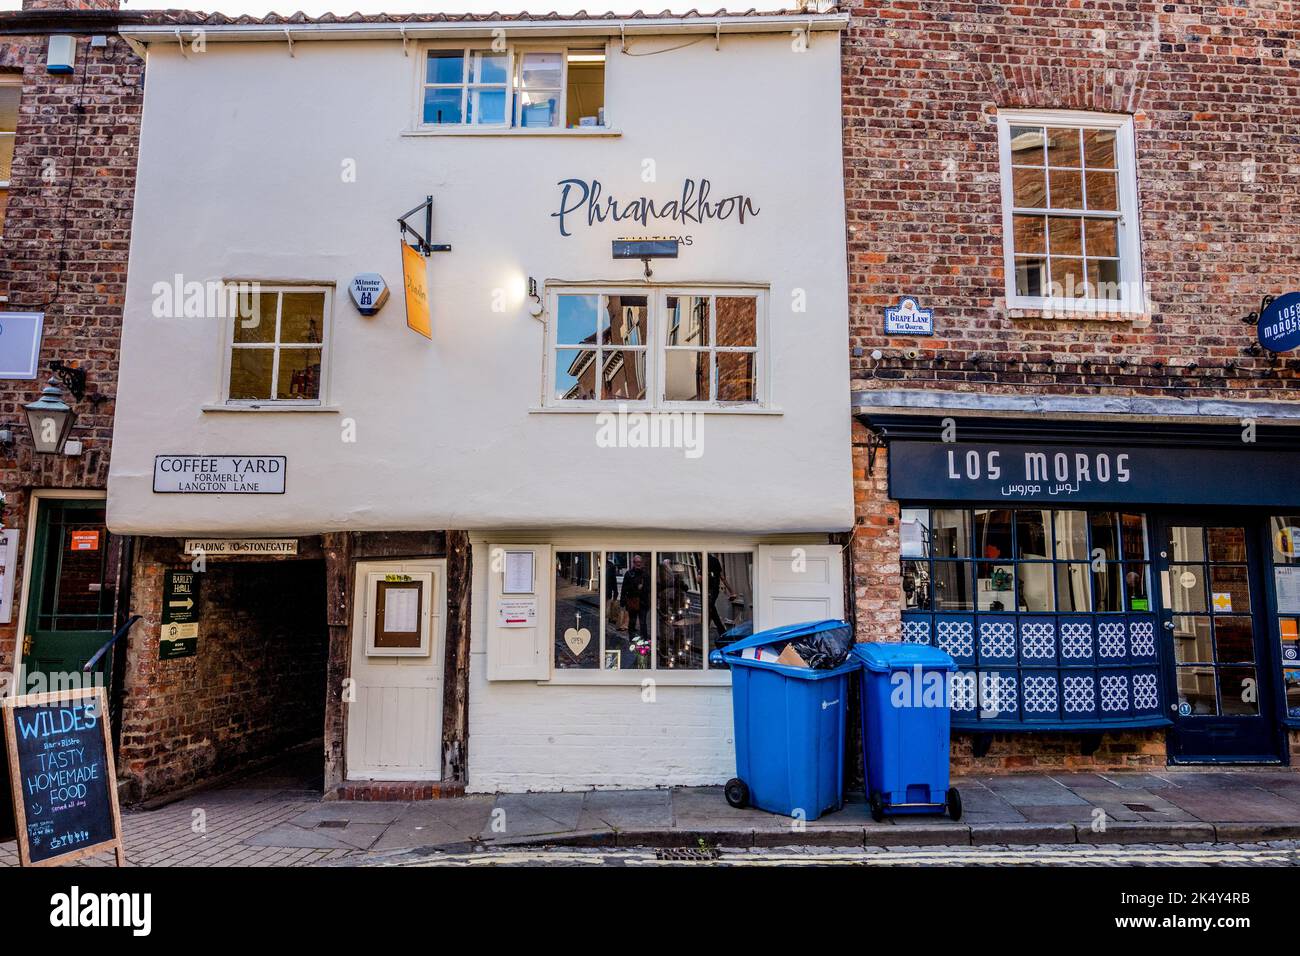 The Phranakhon Thia tapas bar and restaurant in Grape Lane, quarter of the city of York and a alleyway leadind to Coffee Yard. Stock Photo